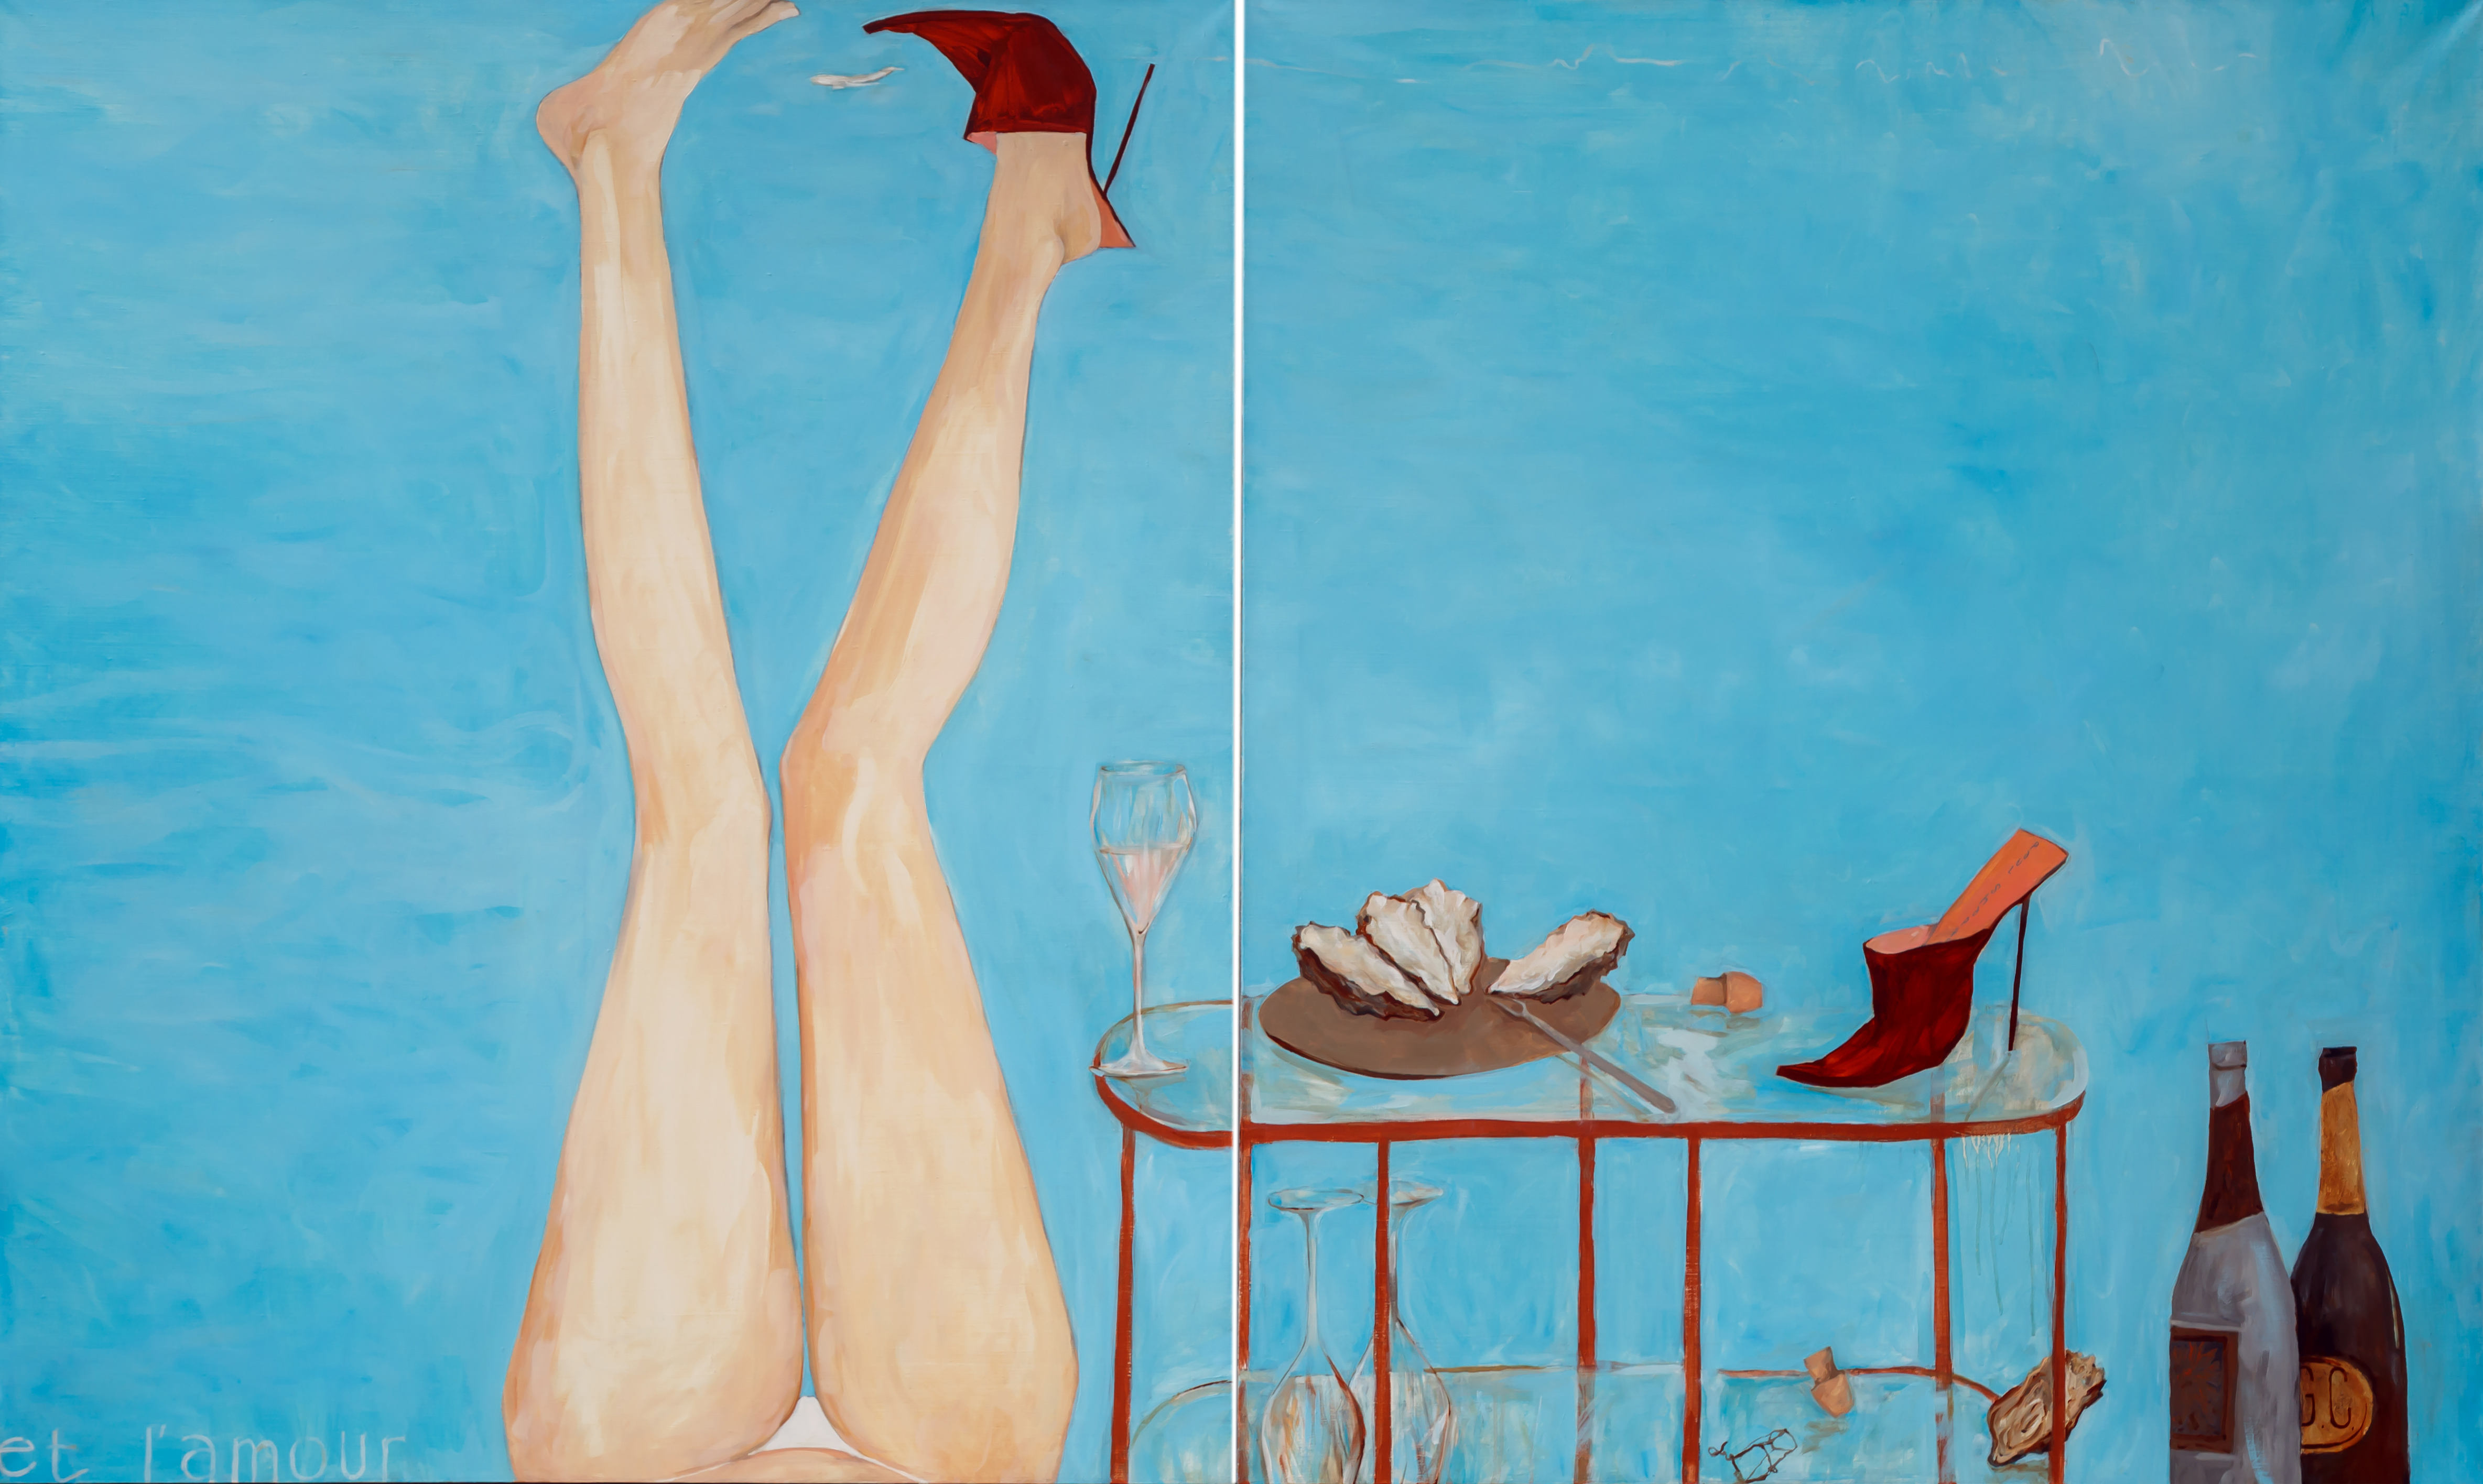 I’ve learnt to catch airplanes with my legs canvas, oil  200x120cm